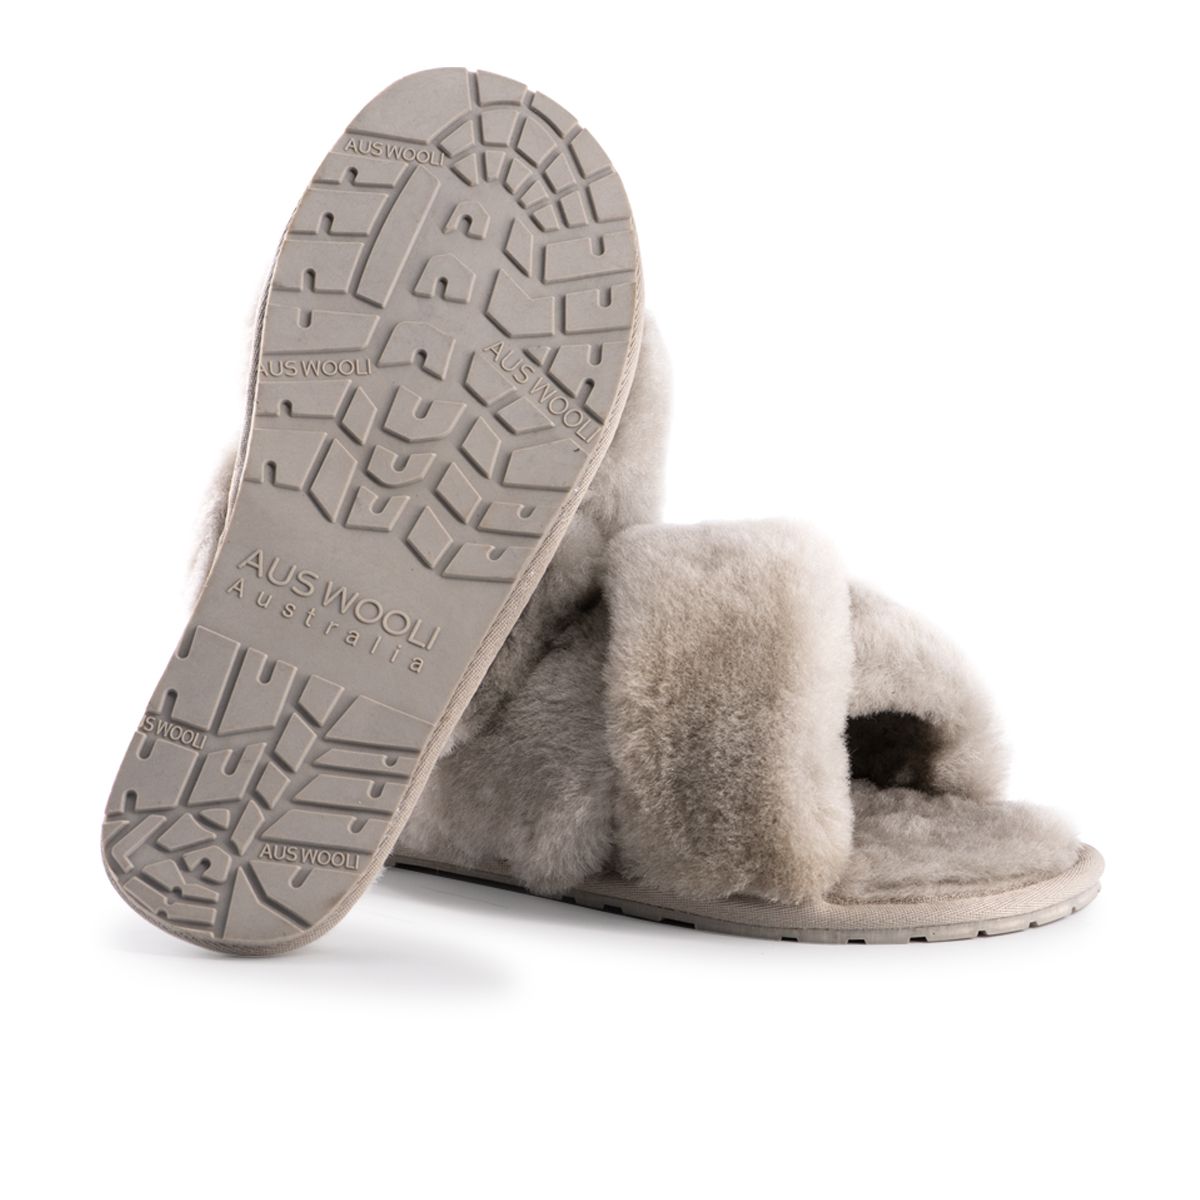 Soft premium genuine Australian Sheepskin wool upper
 Easy to slide on footwear used in any weather
 Full premium sheepskin insole
 Cross over style strap giving a great fit
 Soft Rubber outsole – highly durable and lightweight
 Stylish, Fluffy and cosy all at the same time
 100% brand new and high quality, comes in a branded box, suitable for gifting